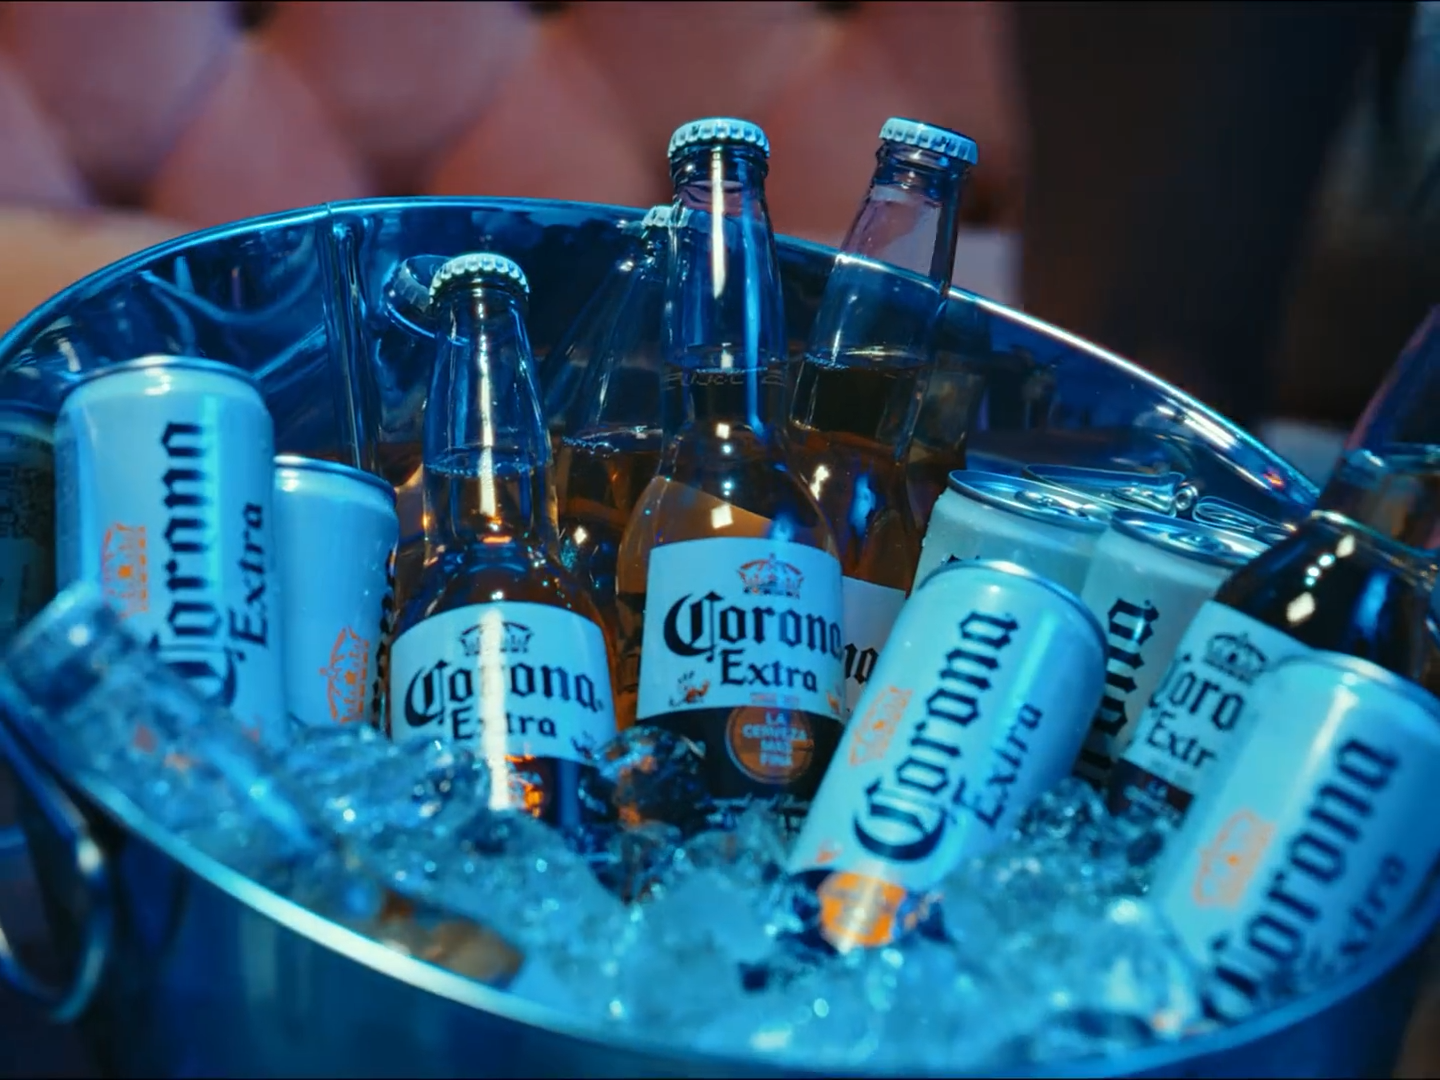 Coi Leray Corona bottle product placement by Mirriad